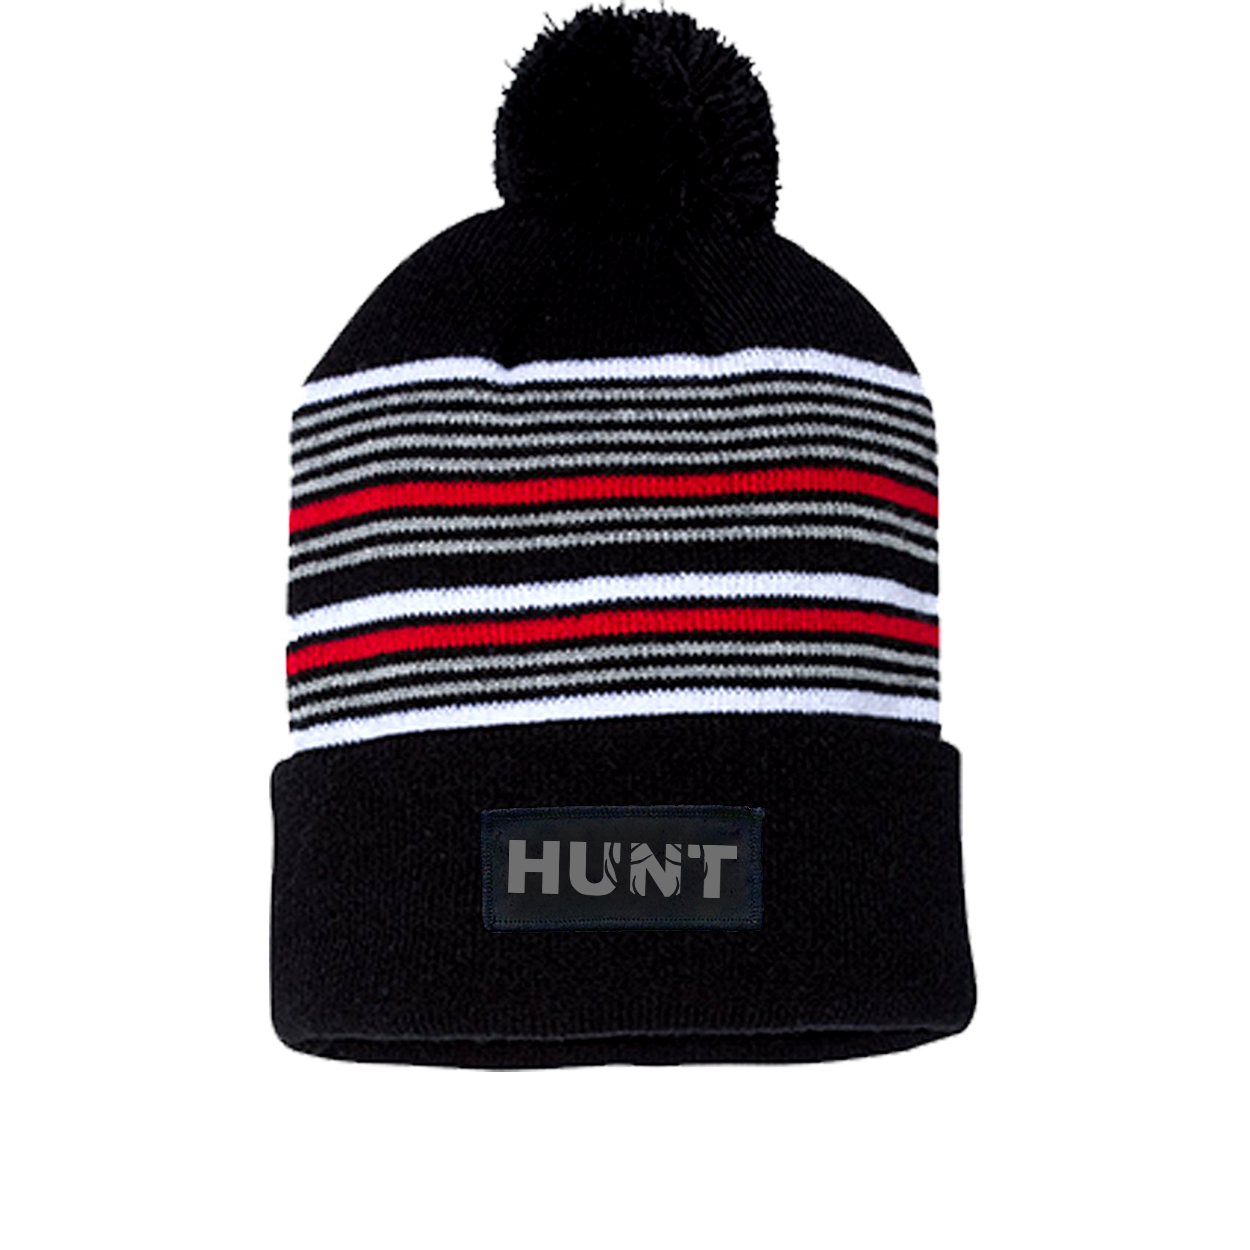 Hunt Rack Logo Night Out Woven Patch Roll Up Pom Knit Beanie Black/ White/ Grey/ Red Beanie (Gray Logo)